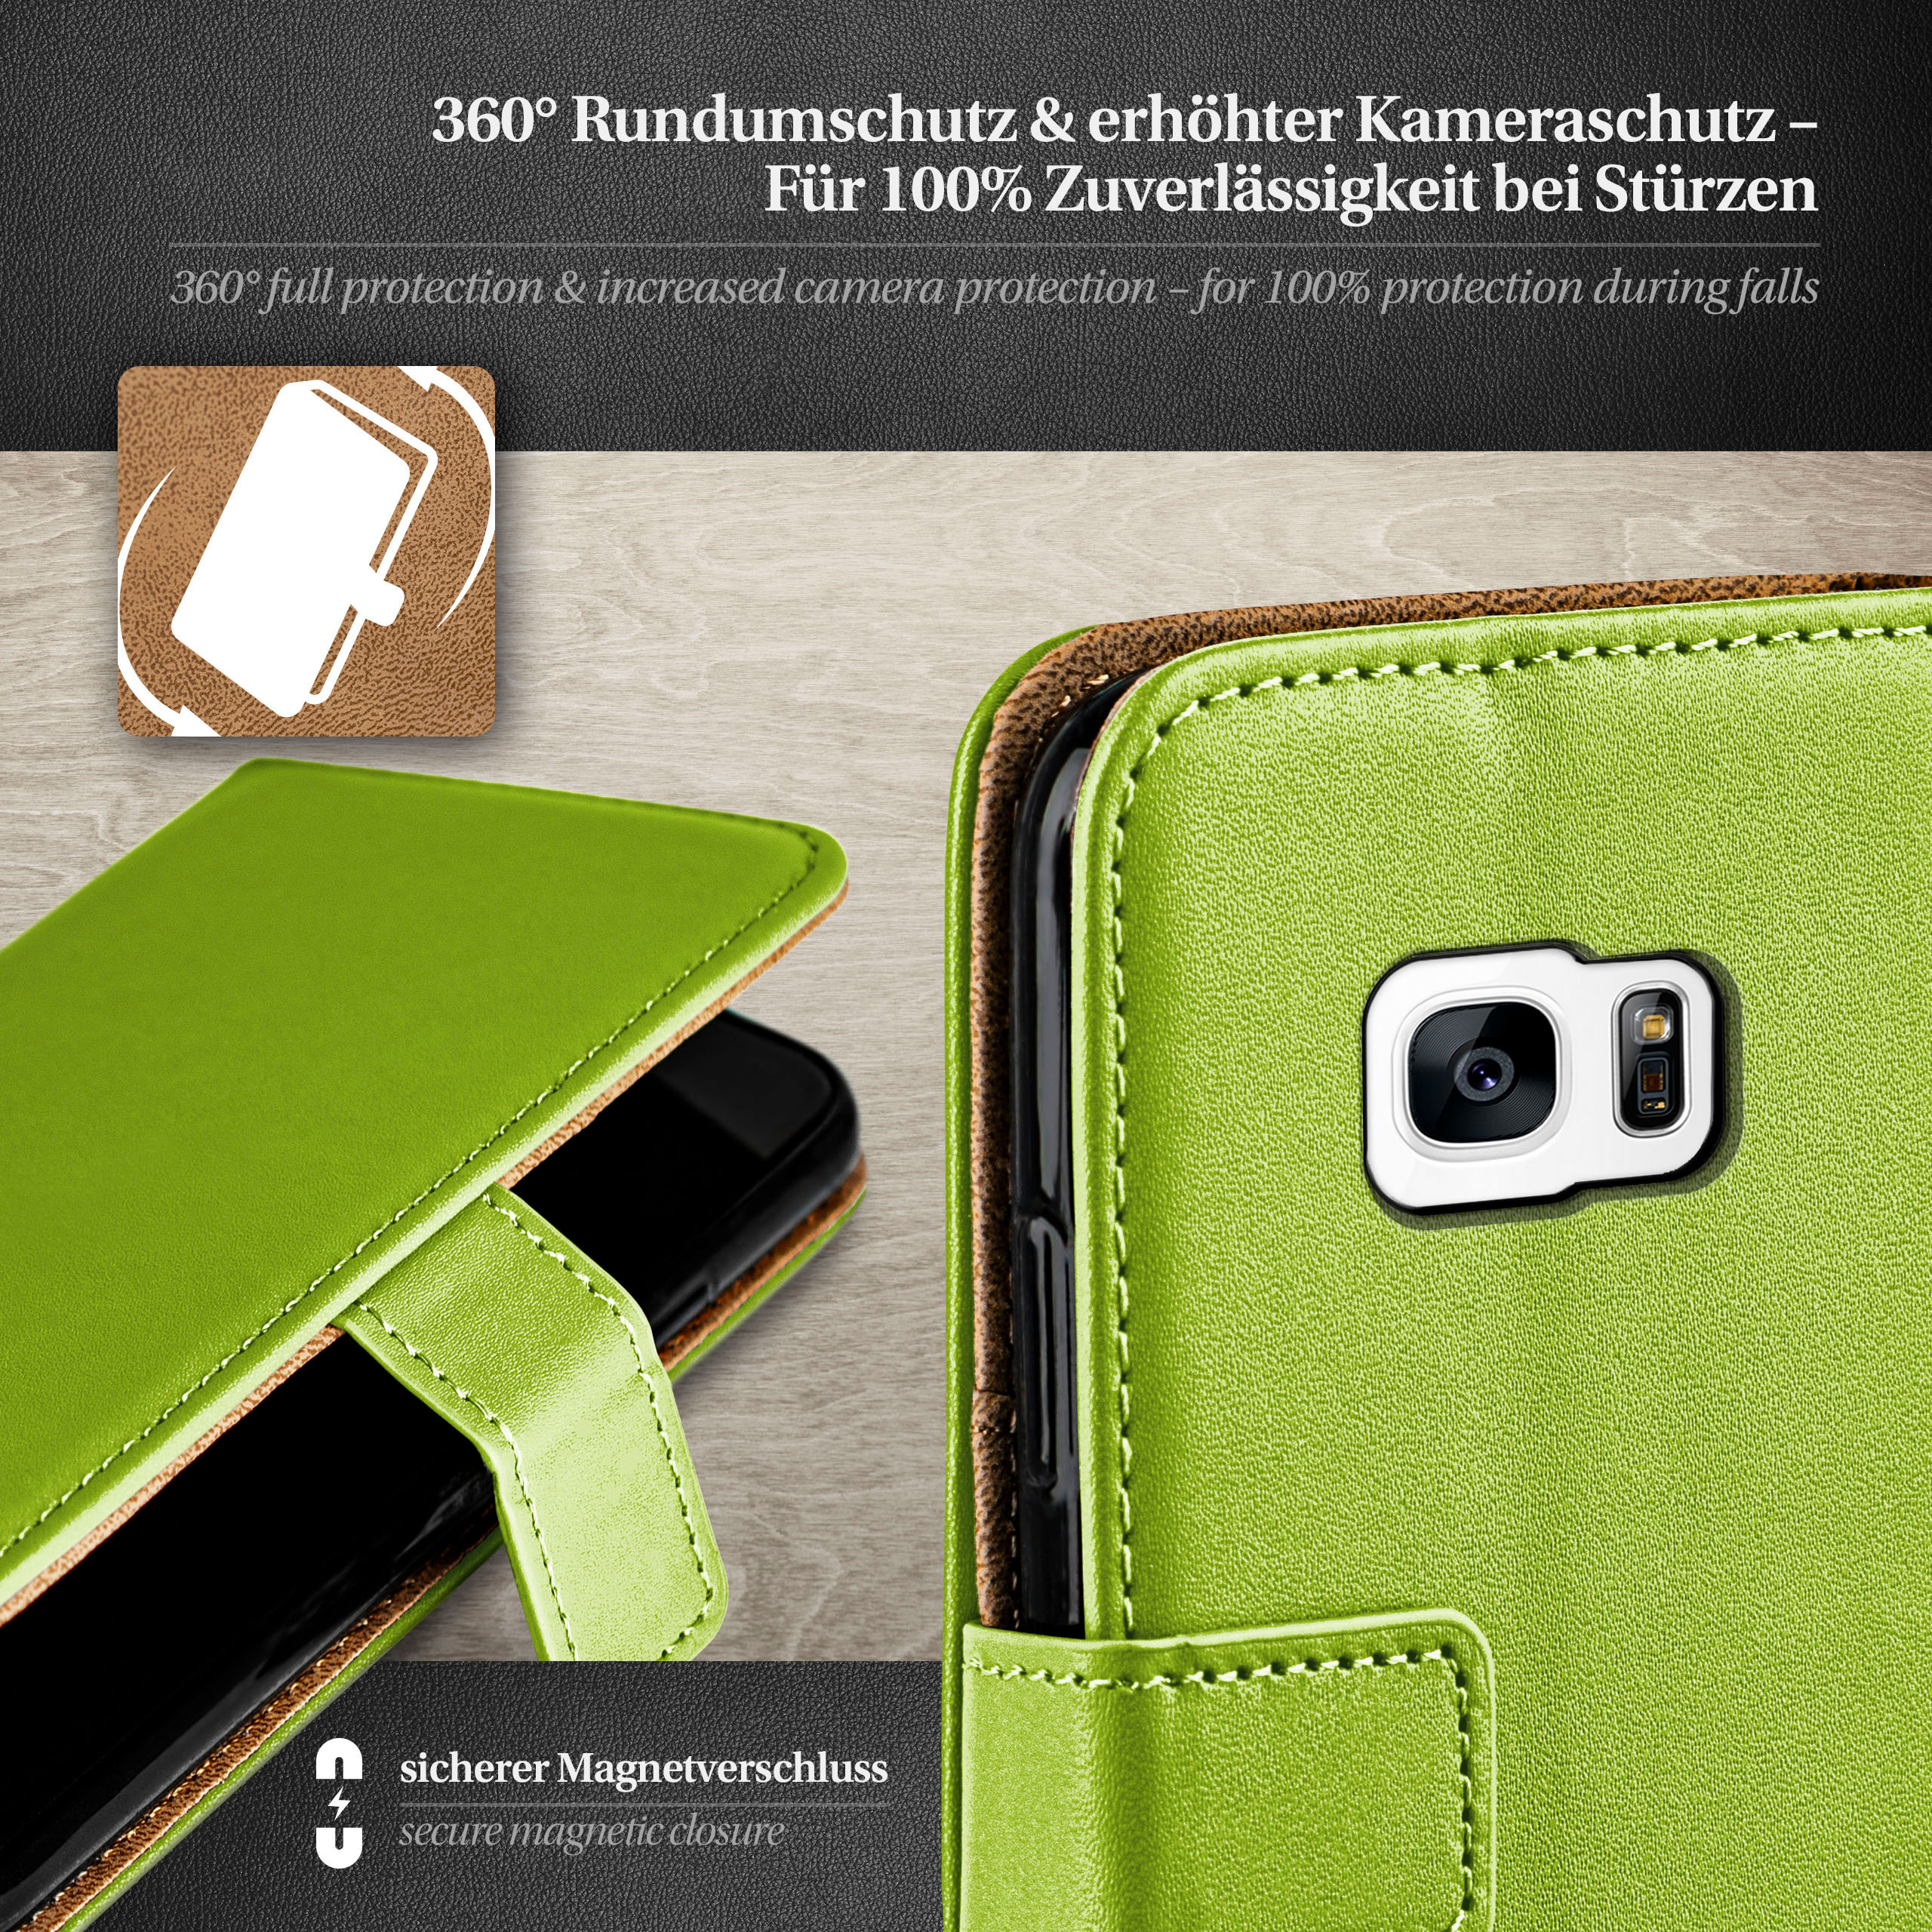 Bookcover, Galaxy MOEX Case, S7, Samsung, Book Lime-Green